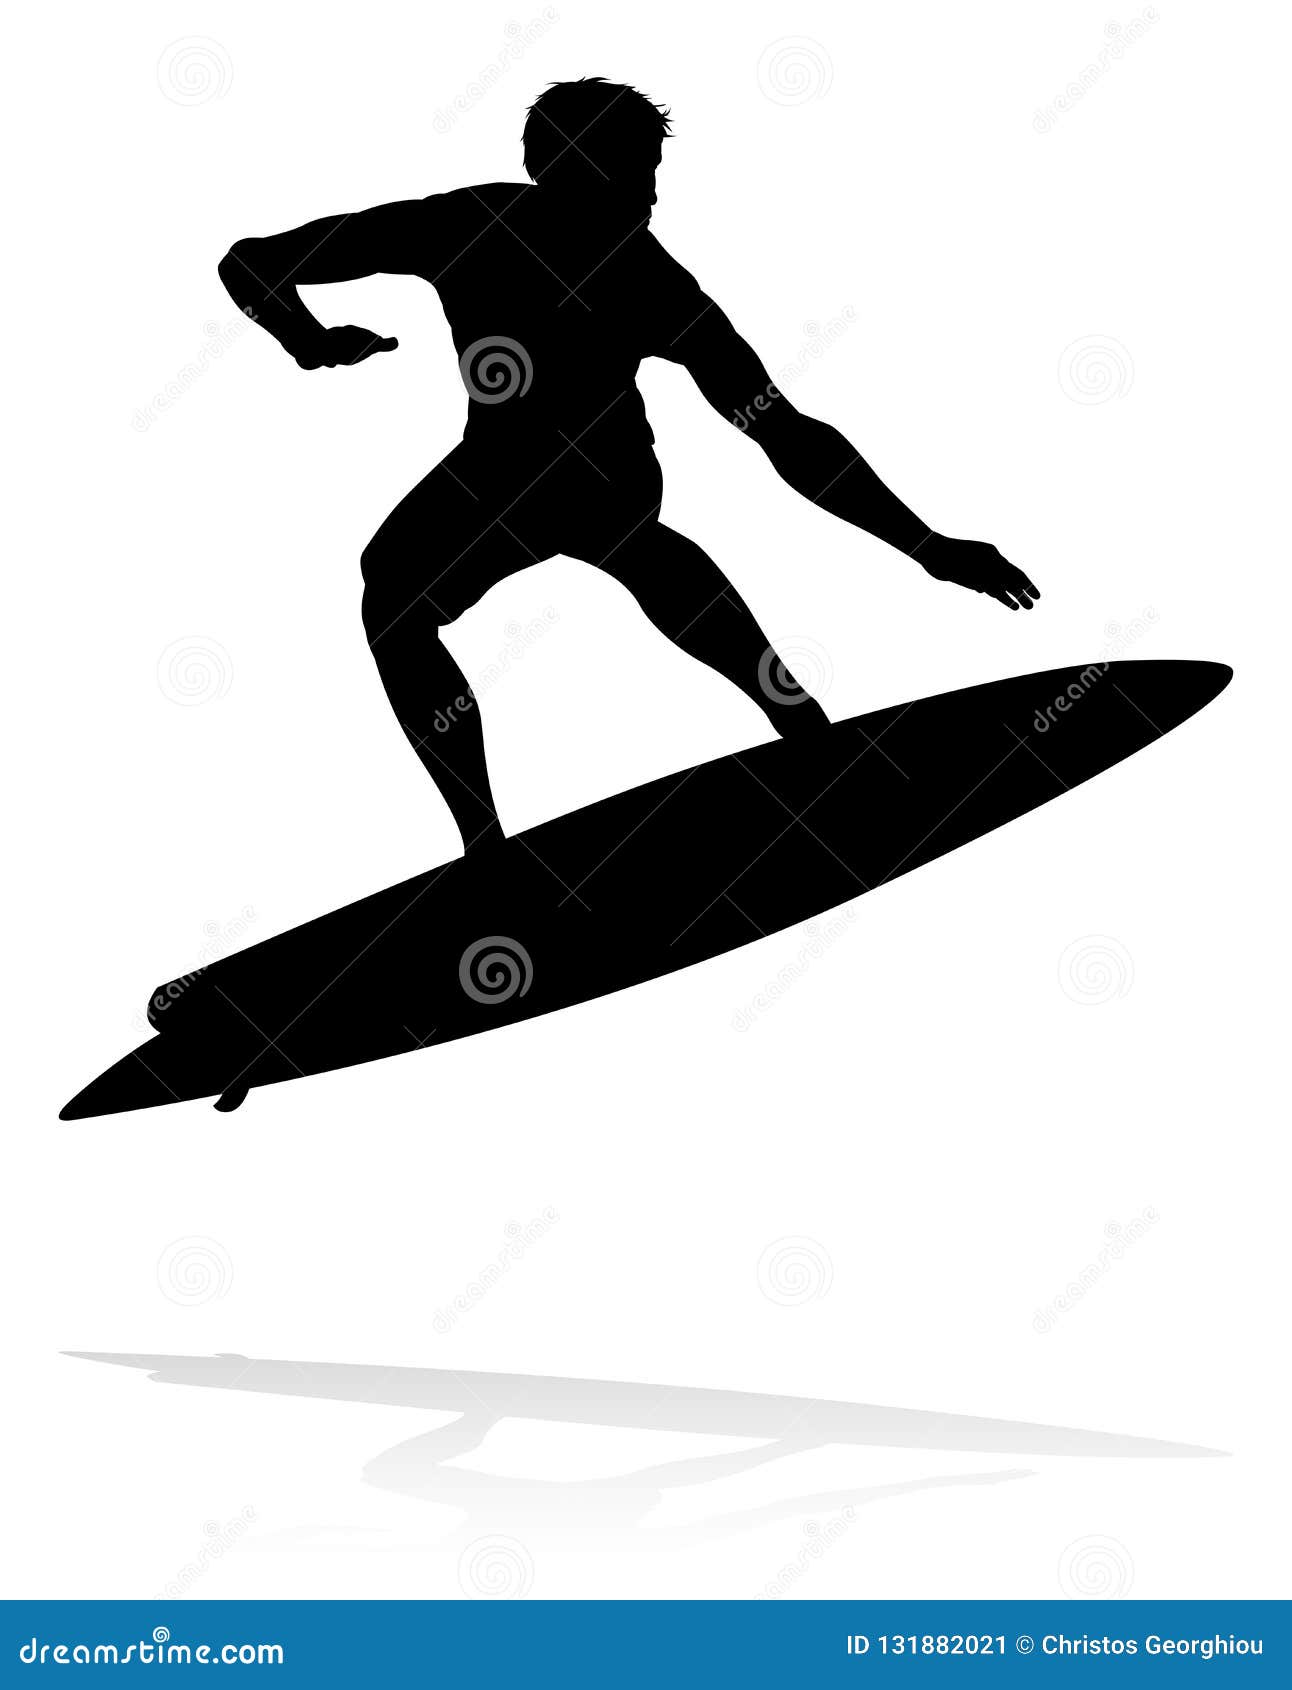 Surfer Silhouette stock vector. Illustration of sillouettes - 131882021